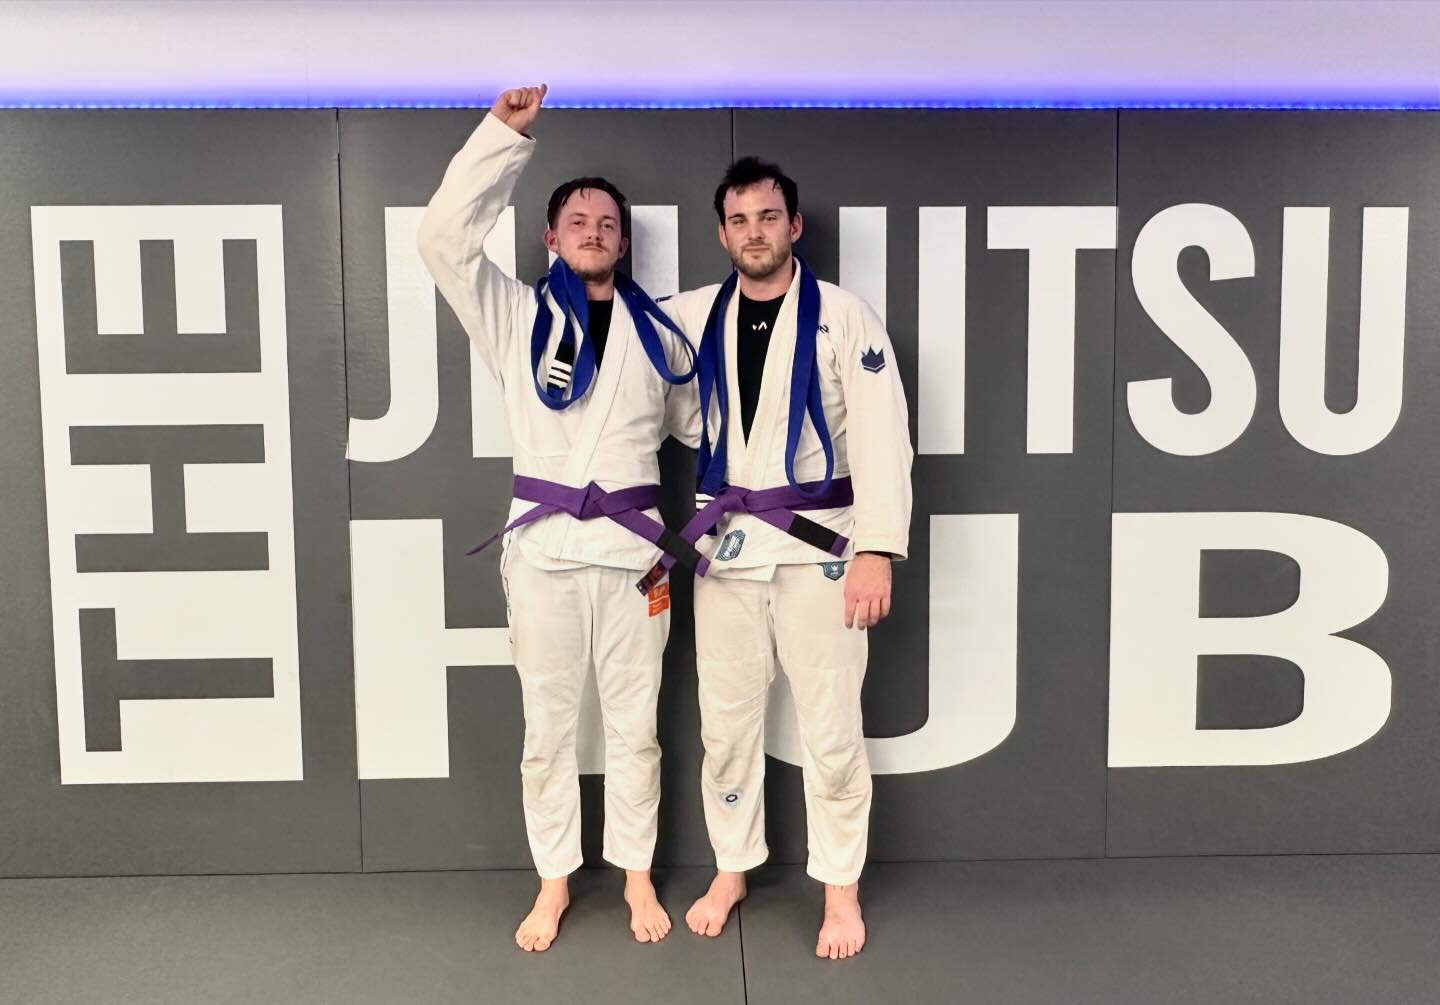 🟪🟪🟪🟪🟪🟪🟪🟪⬛️⬛️⬛️🟪🟪

Declan @neclanbrambower &amp; Jared @jstor10 consistently show up on the mats, do the work &amp; have a good time in the process. Massive Congratulations on the well deserved Level Up ⬆️ to Purple Belt boys 👏🏻 

📍 20 No